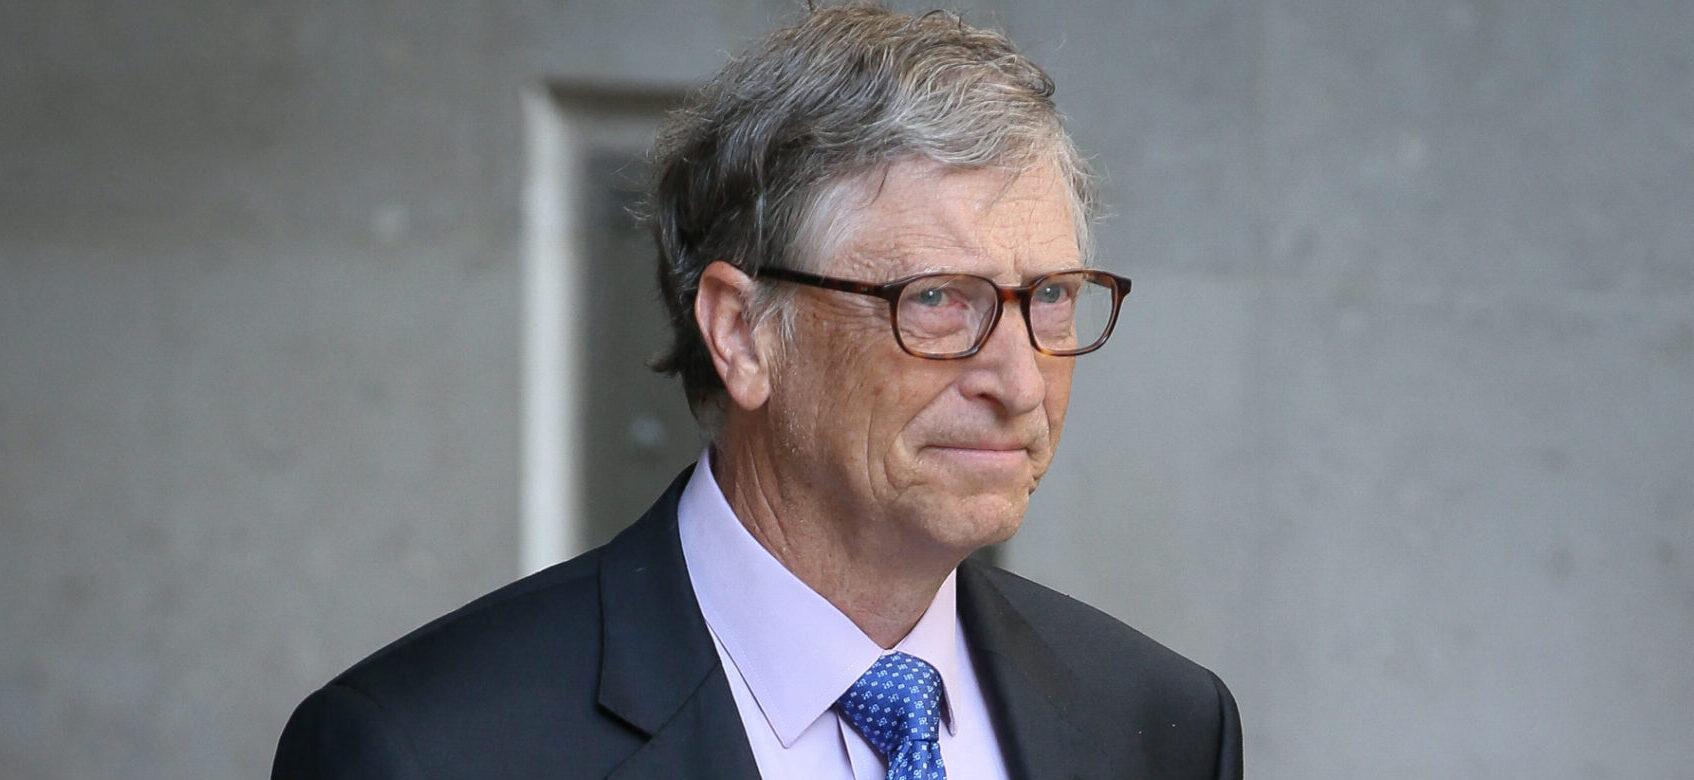 Bill Gates Melts Hearts As The Best Grandfather With Plans To Read First Book To Granddaughter